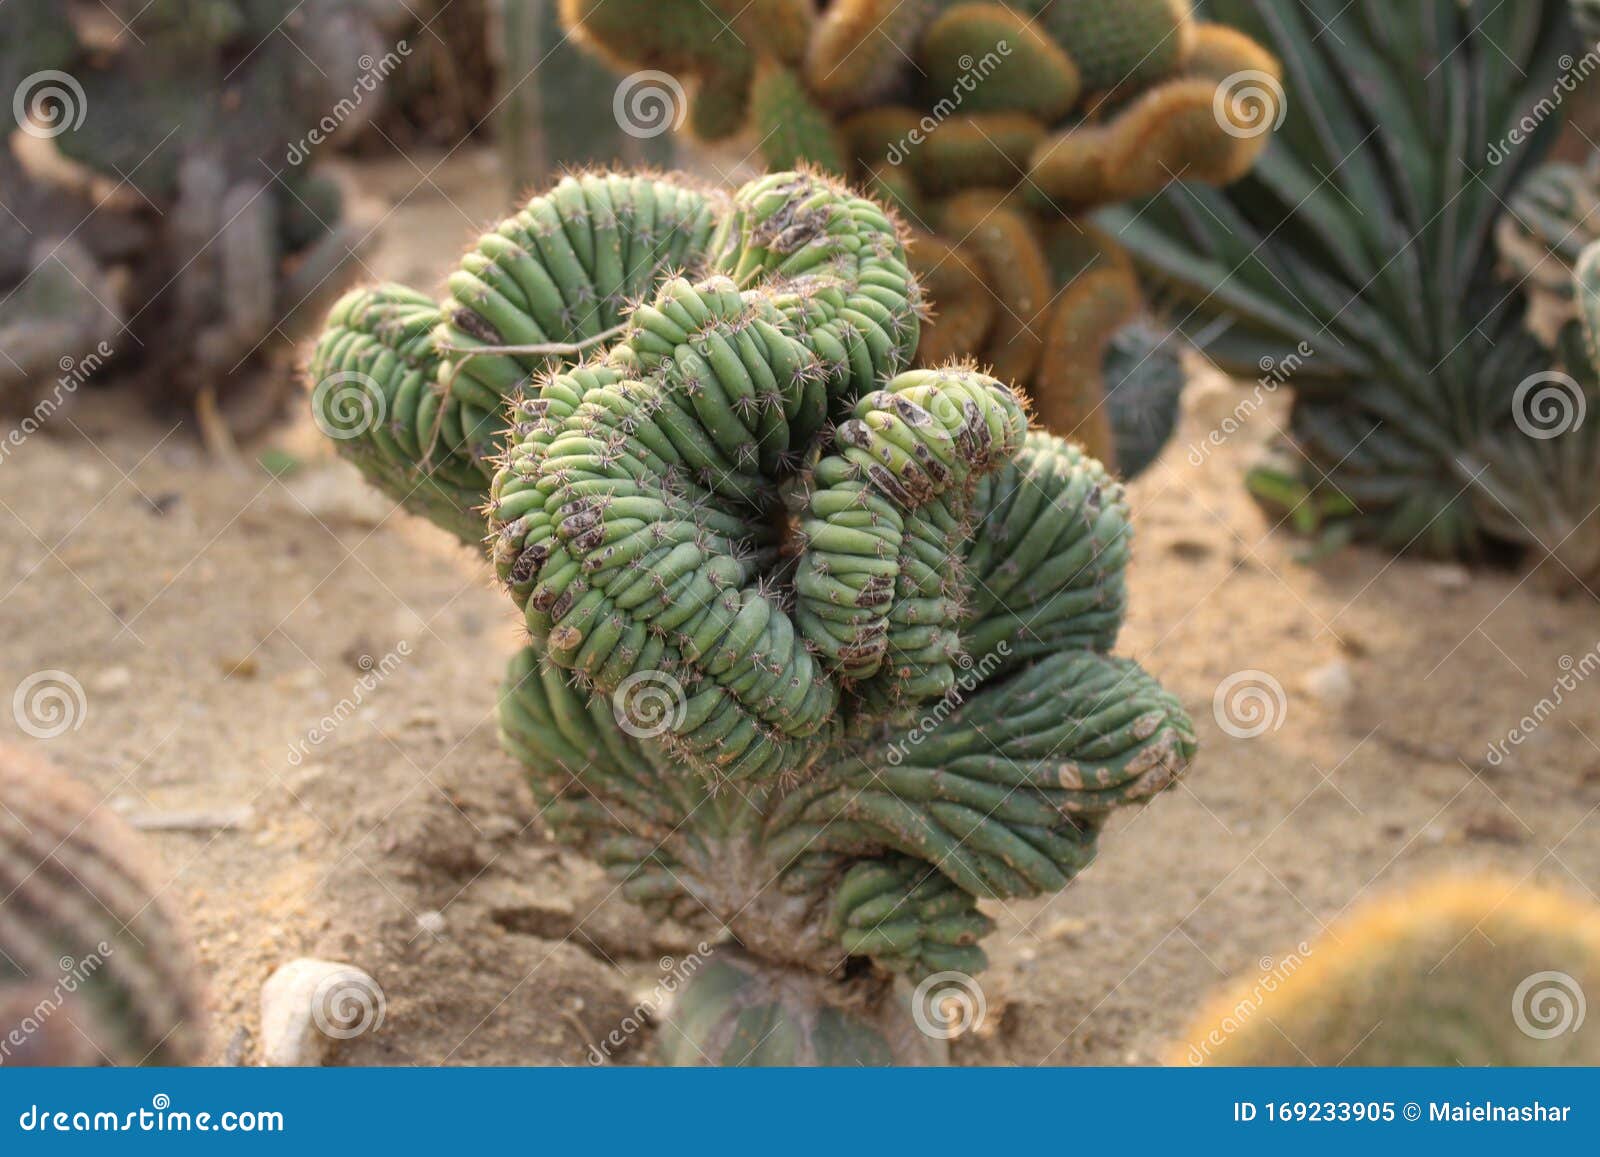 hairy spiny old man cactus.